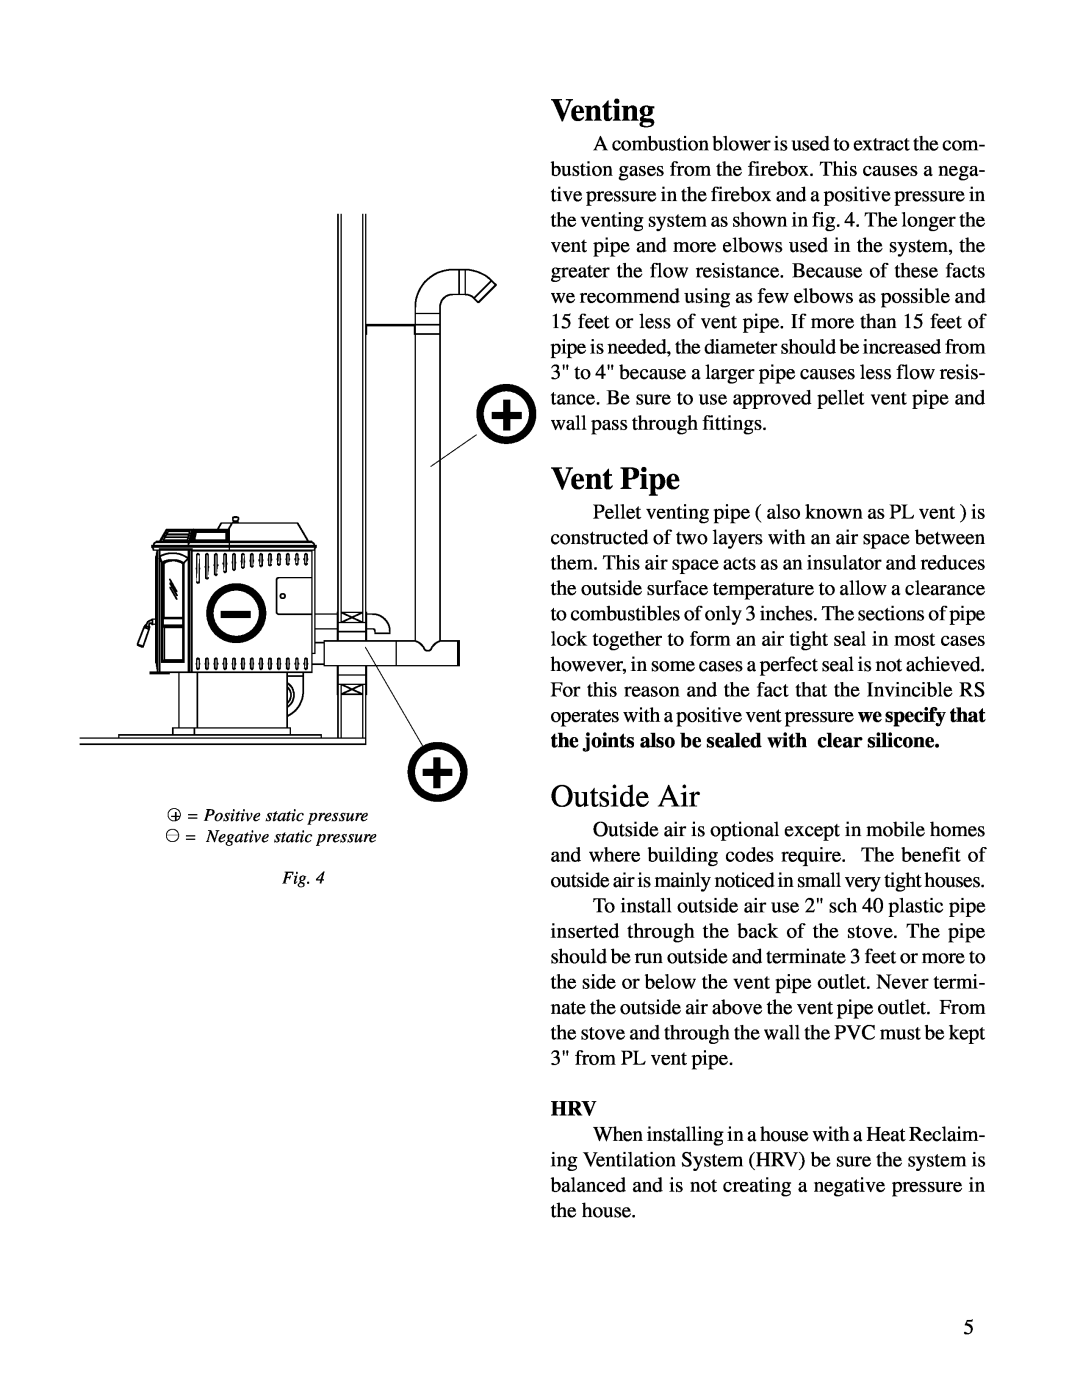 Harman Stove Company R6 owner manual Venting, Vent Pipe, Outside Air 